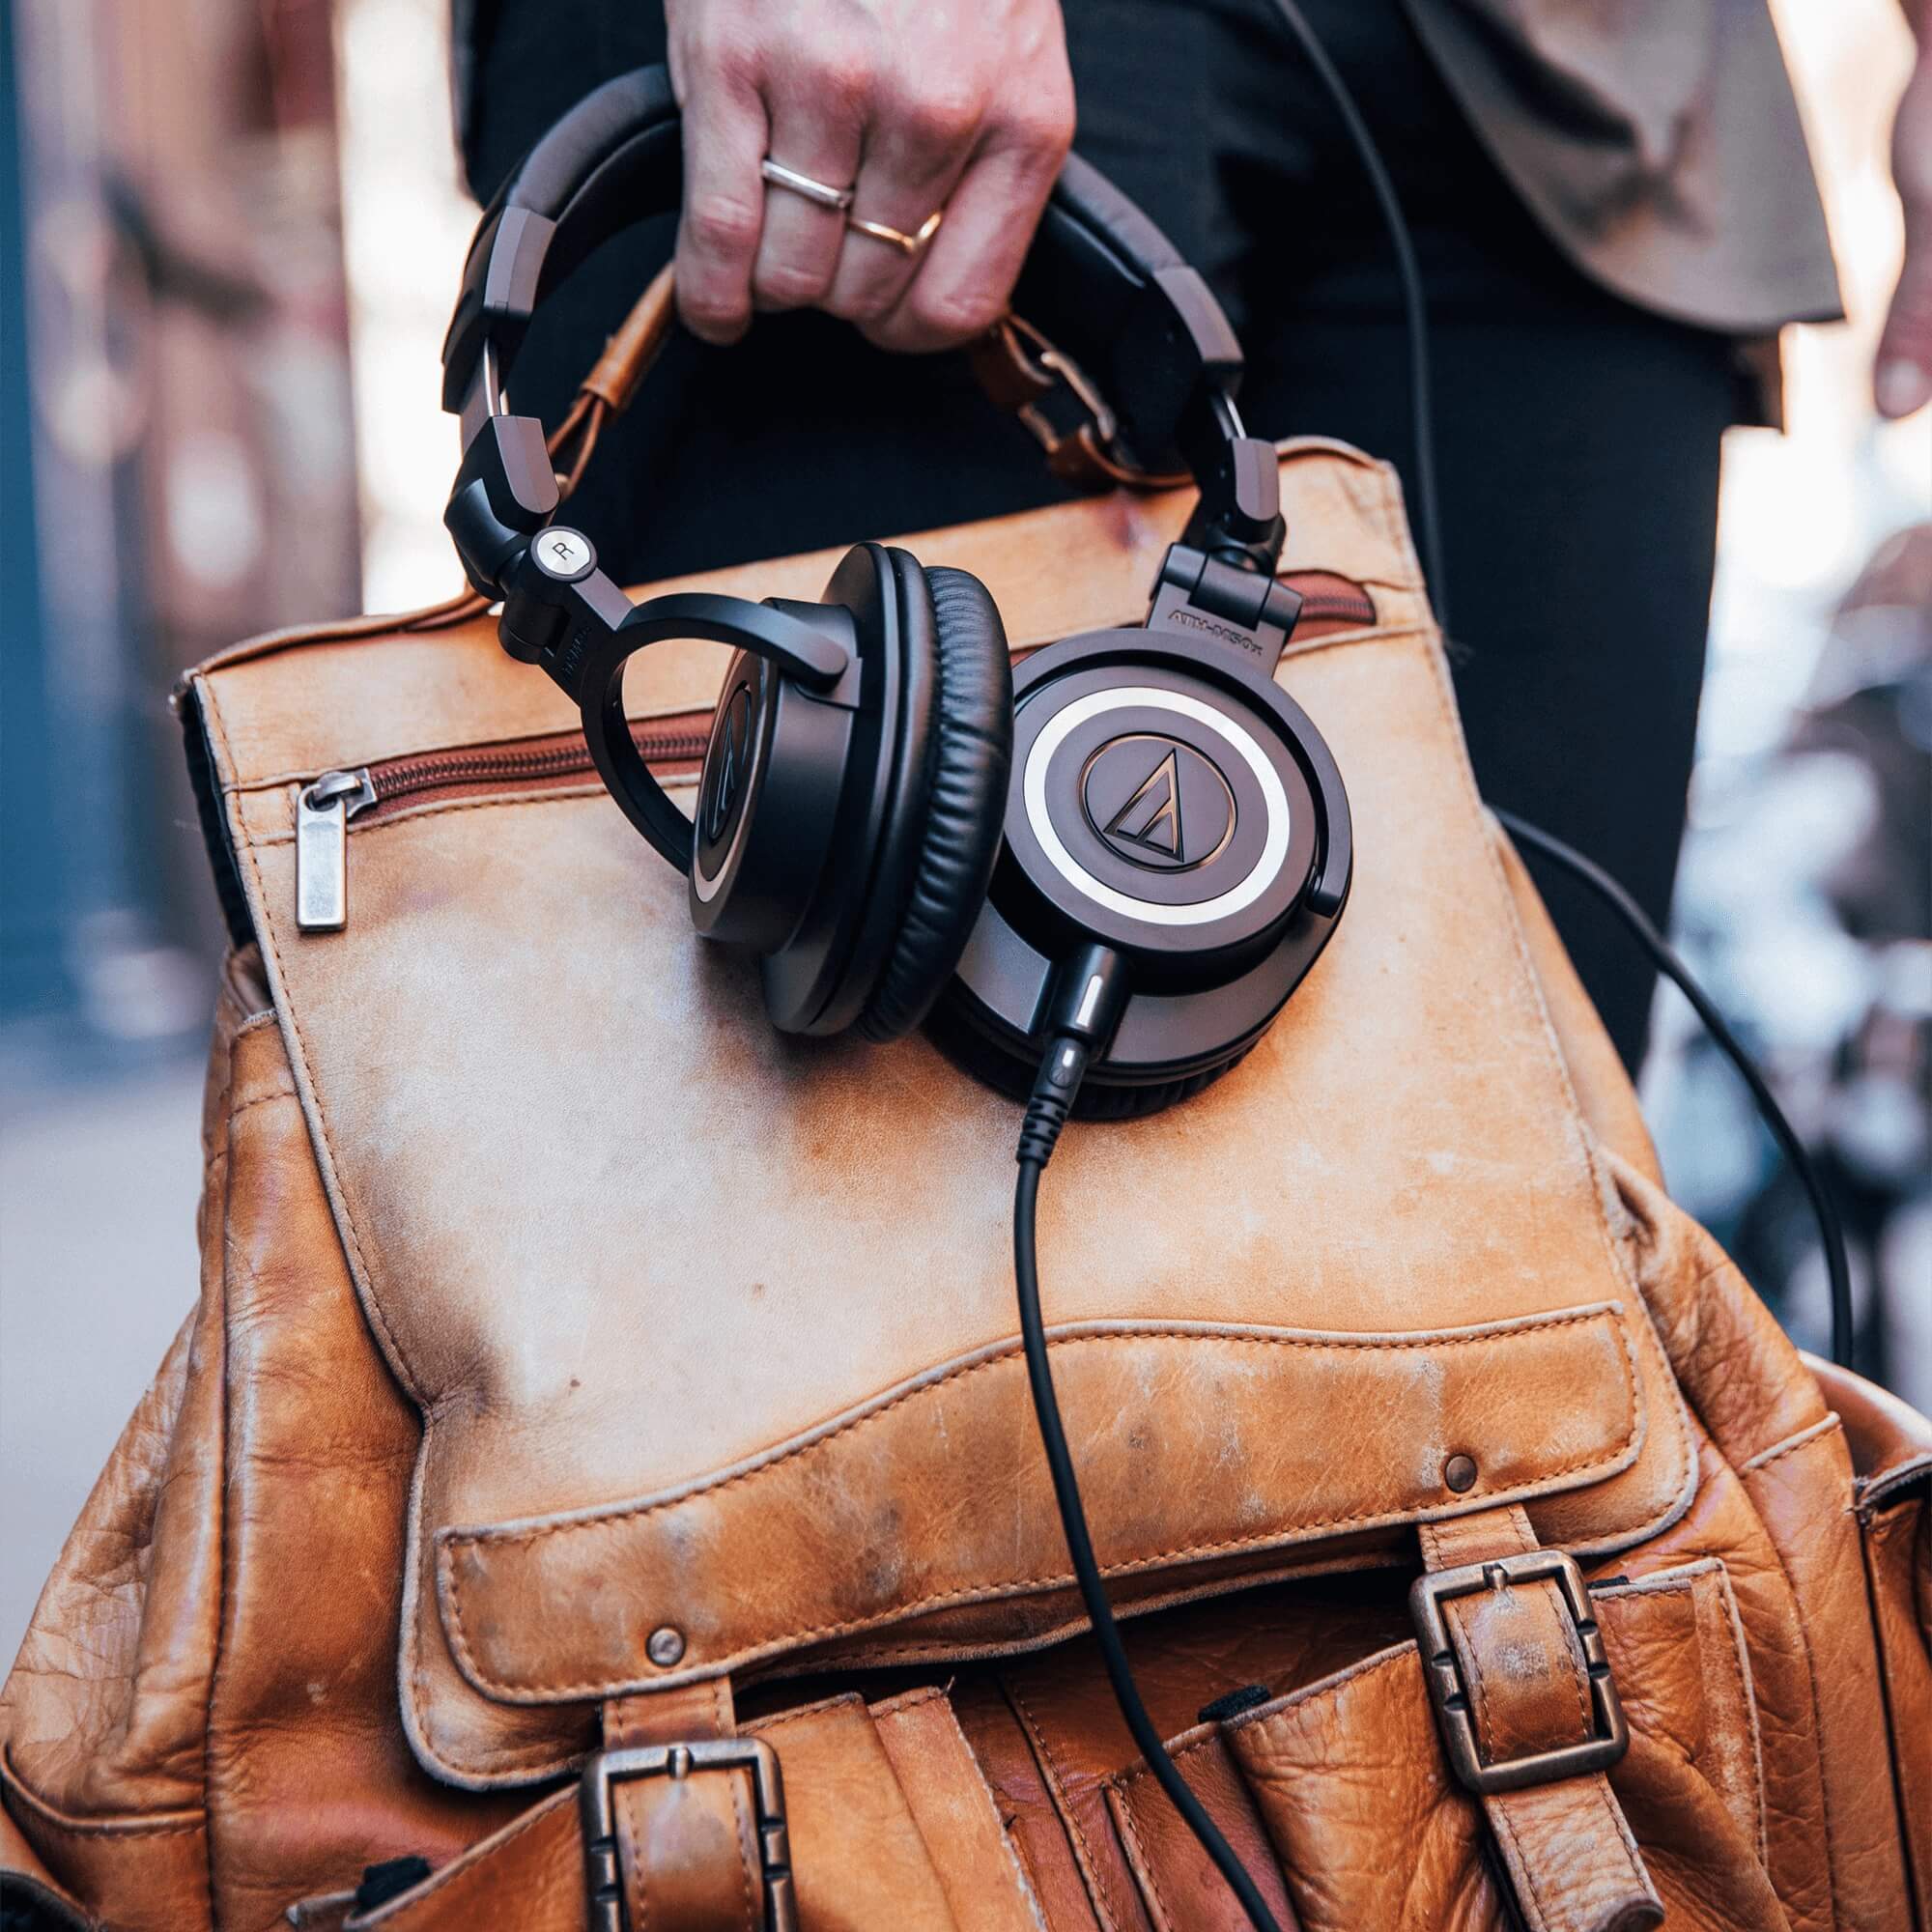 Audio-Technica ATH-M50x Professional Monitor Headphones, for the daily commute